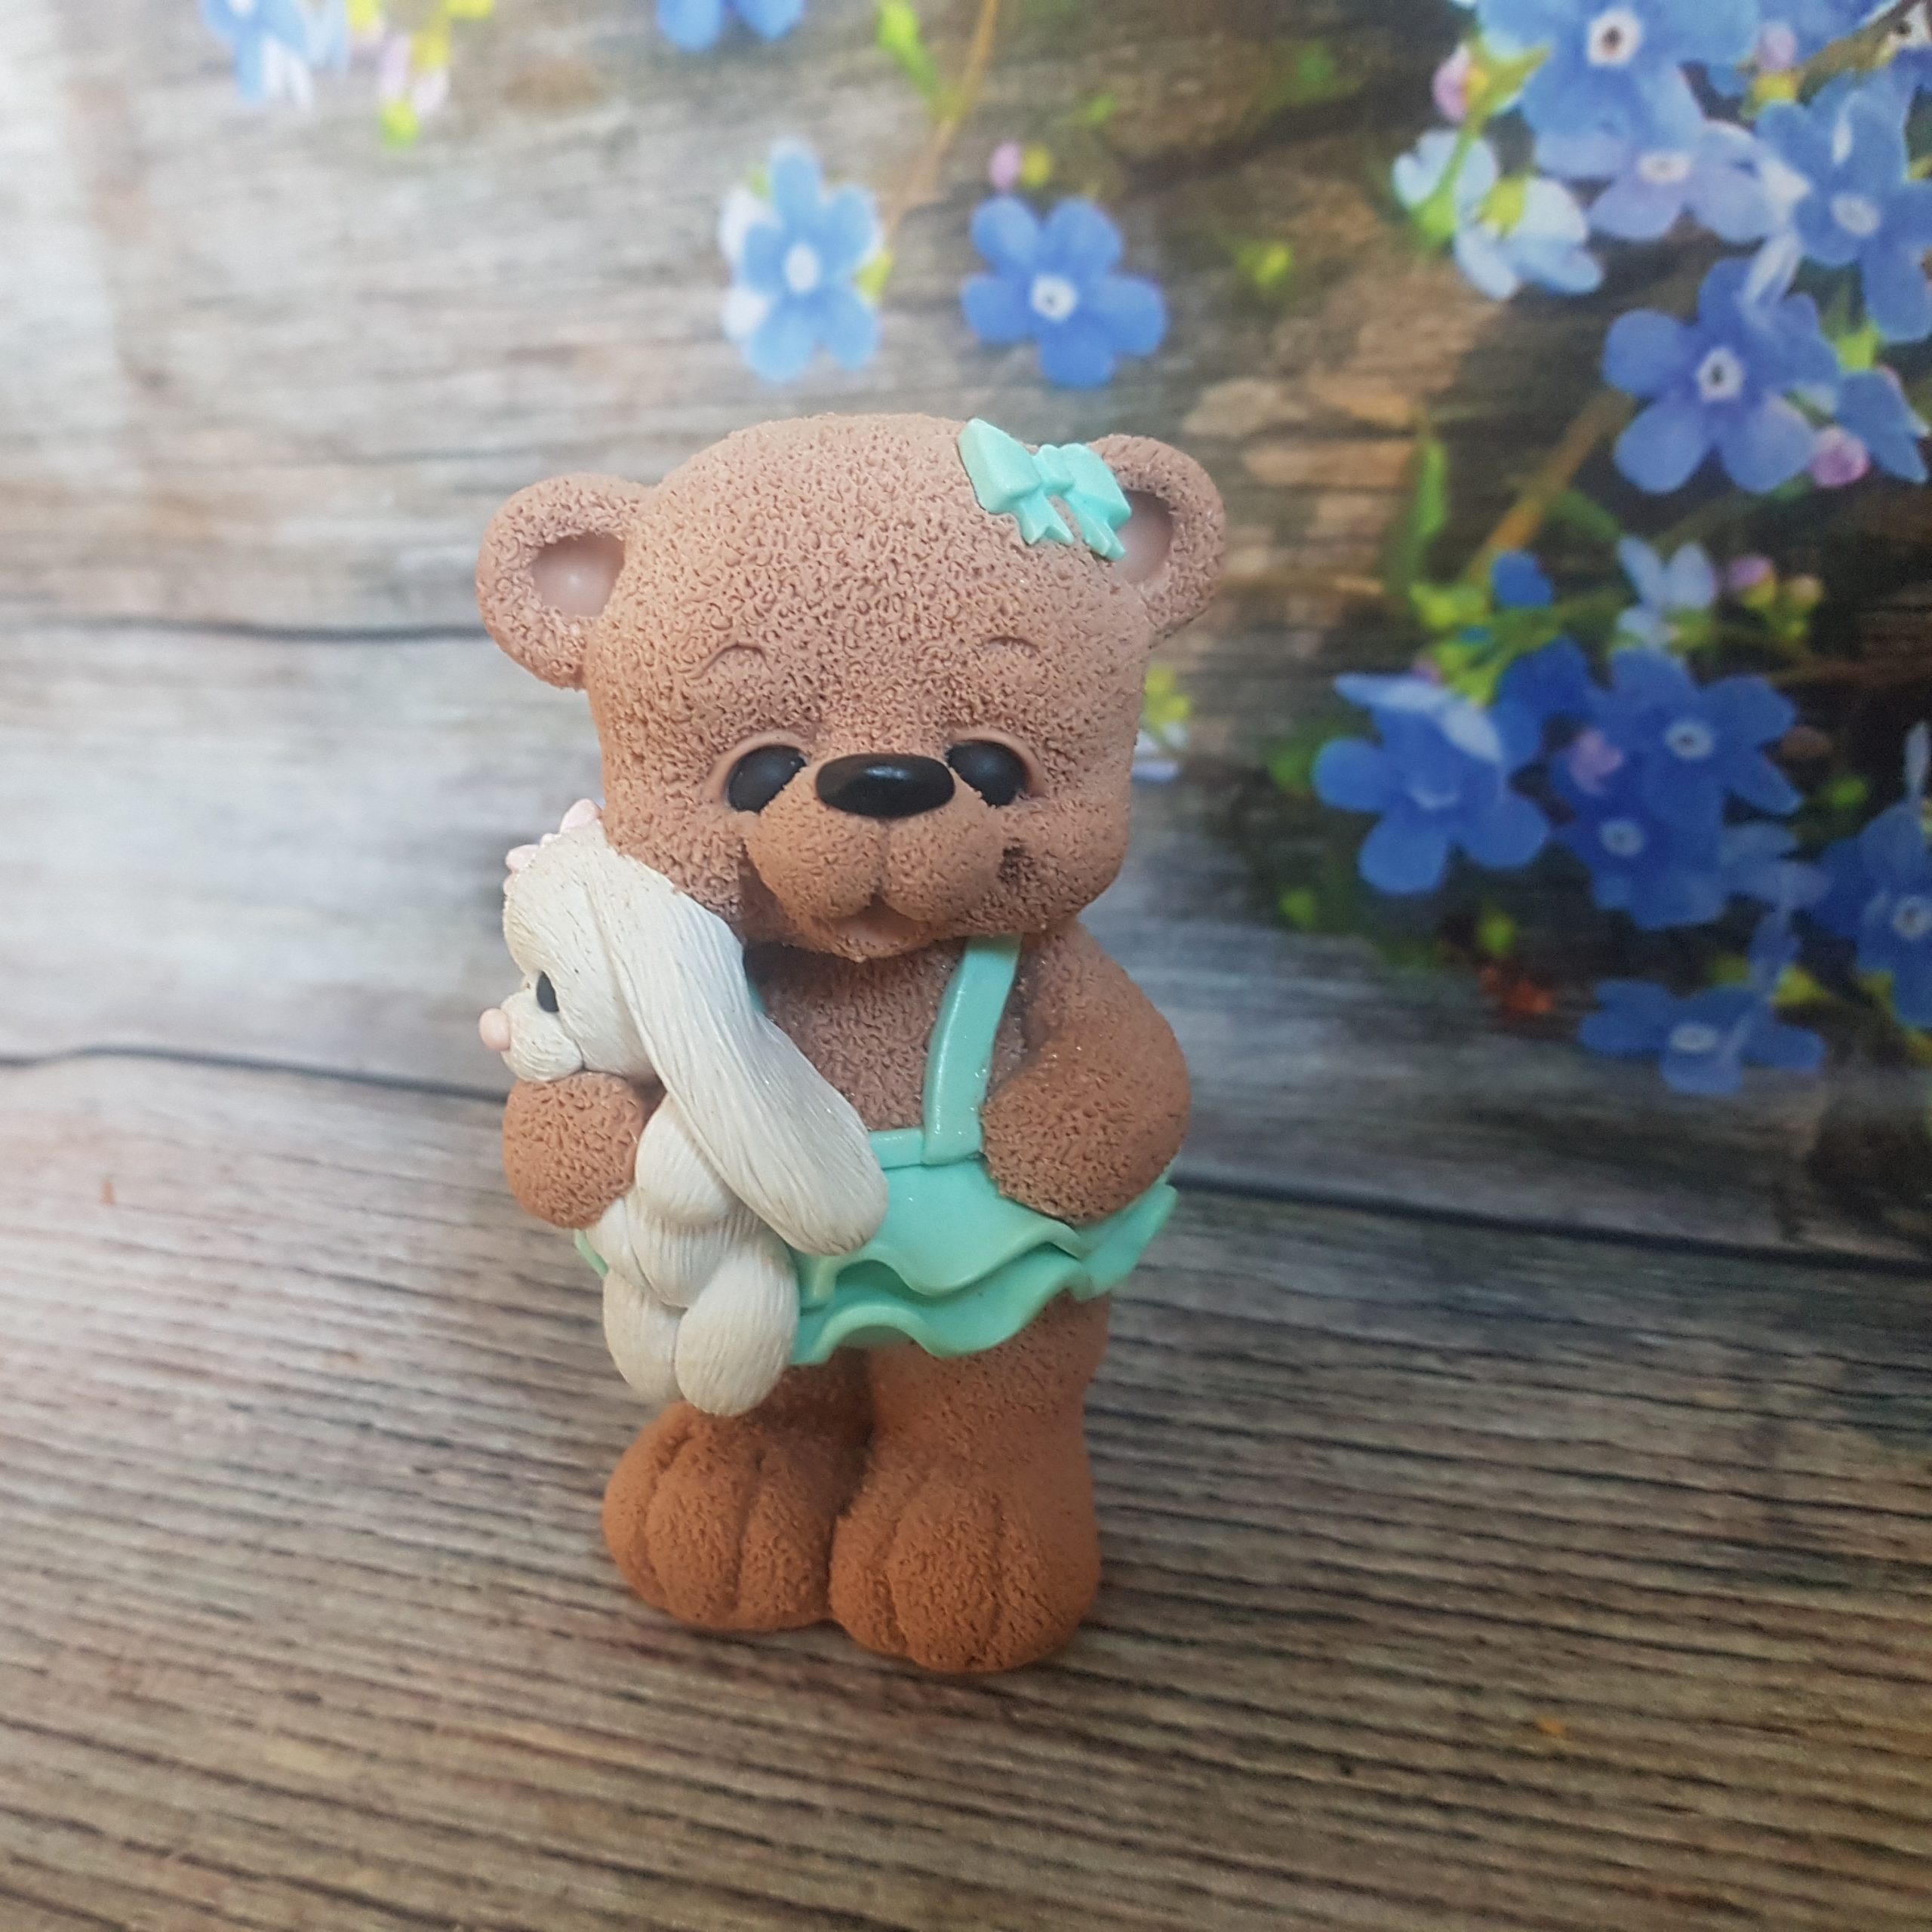 Silicone mold 3d Bear-baby for soap, candles, gypsum, choco